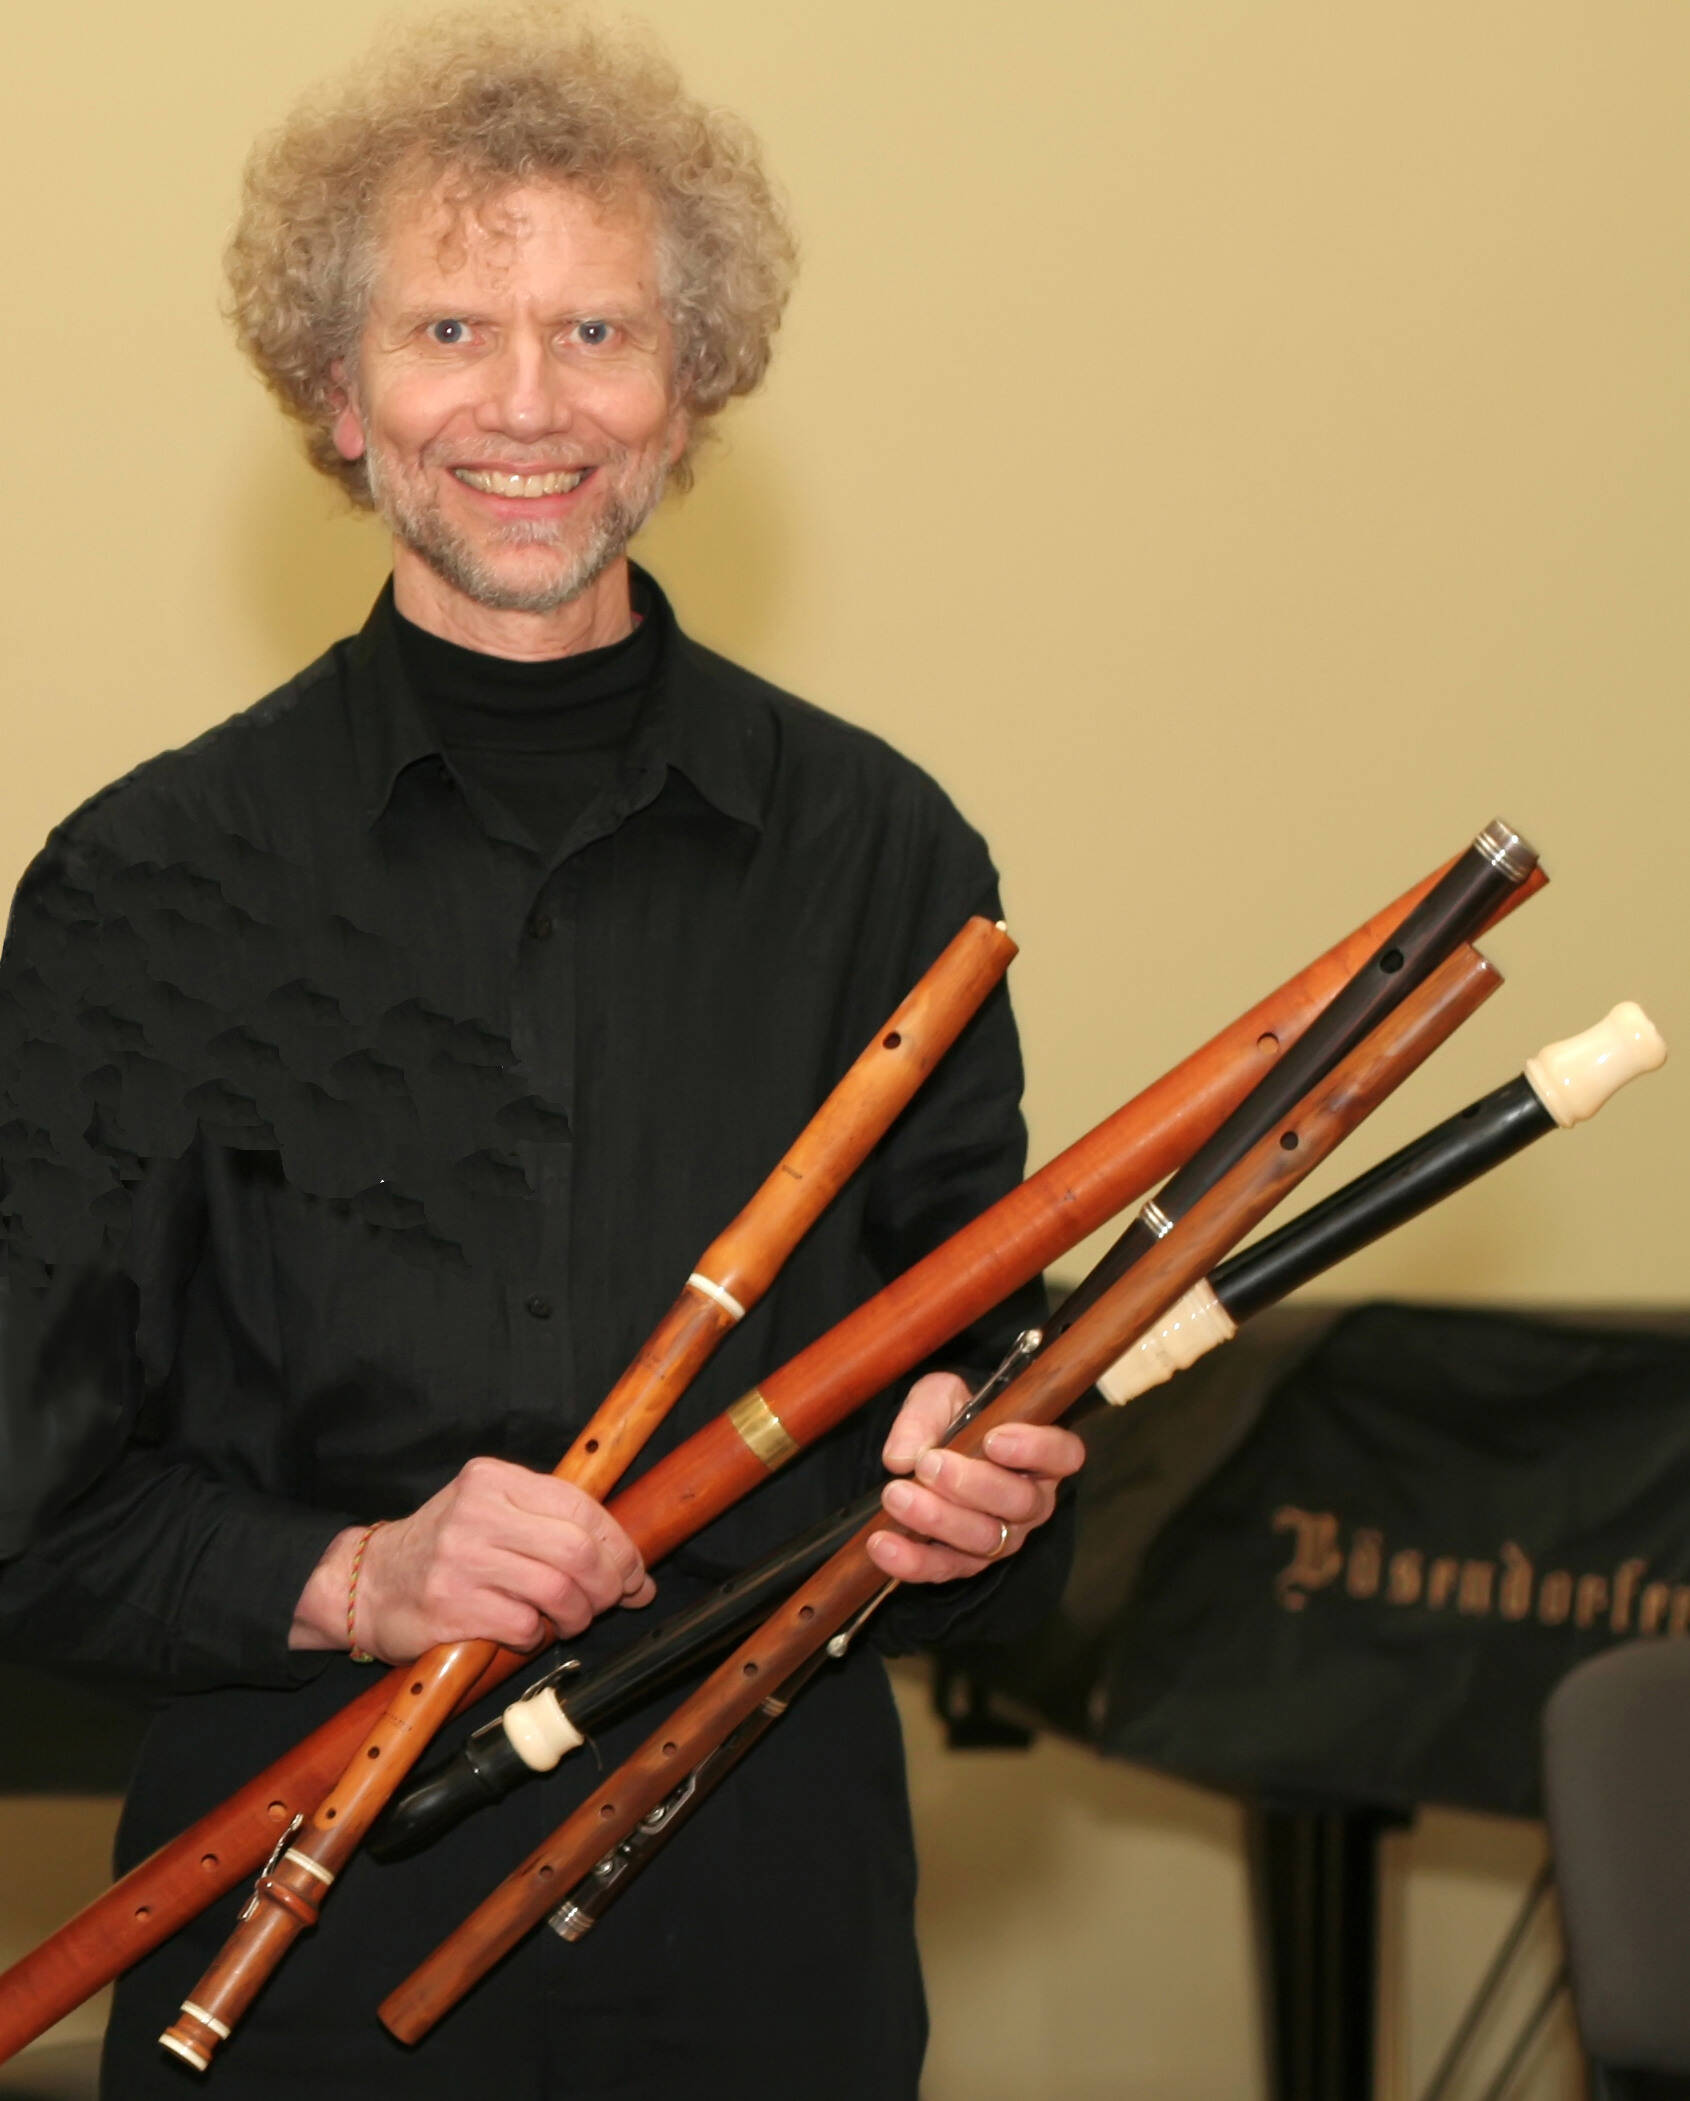 Flutist Jeffrey Cohan is the artistic director of the Salish Sea Early Music Festival. (Photo by Jeff Lvov)